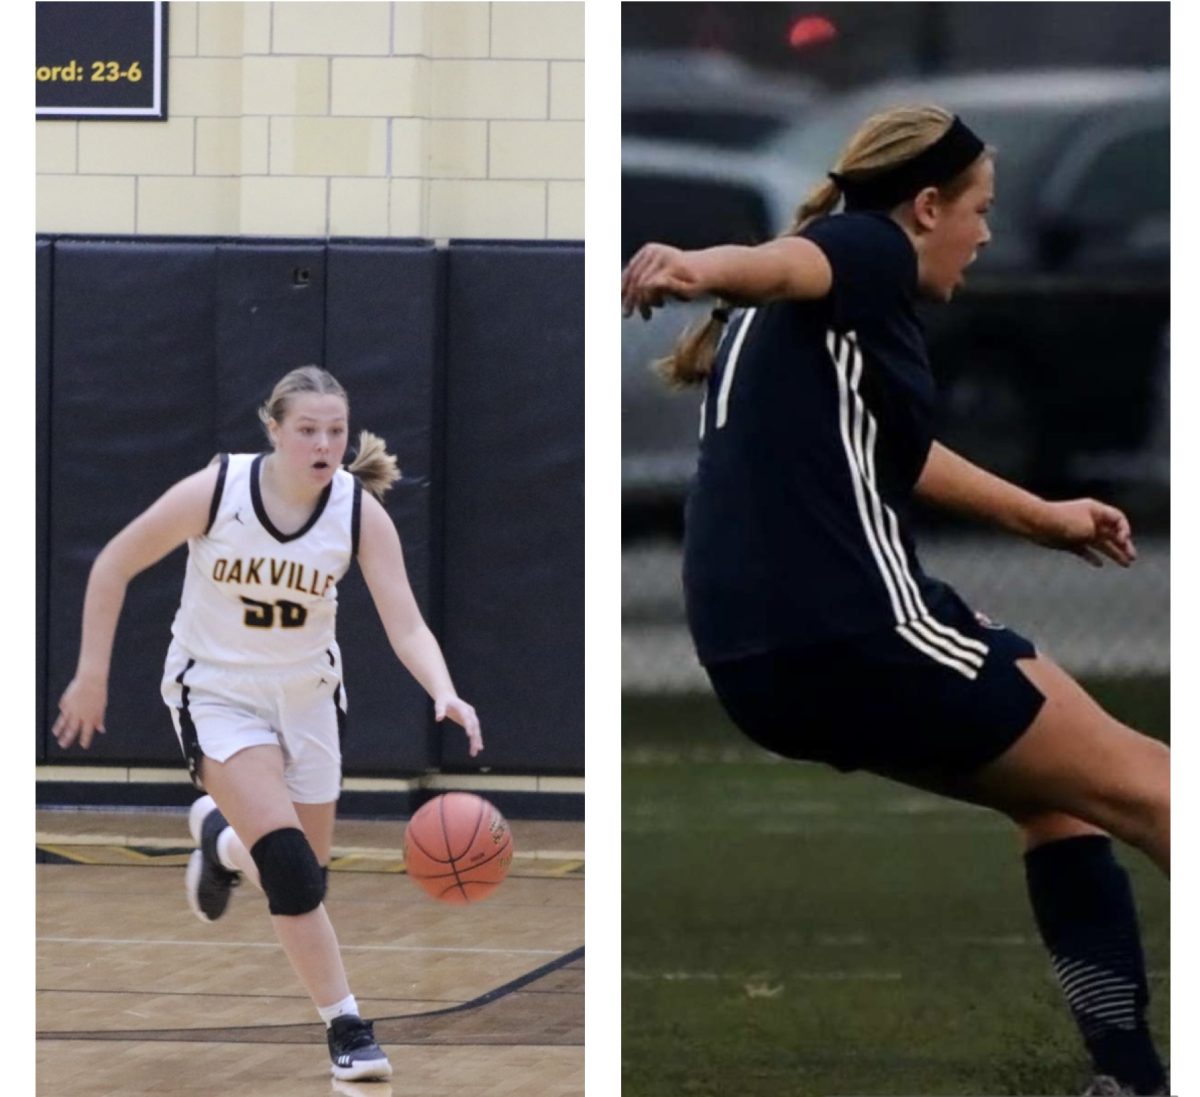 Delaney Earney (10) dribbles the ball during a basketball game in the left picture and kicks the ball during a soccer game in the right picture. “Transitioning is hard sometimes because my club season ends the week before tryouts start, so I am not doing any soccer for a while,” Earney said. She has been playing both soccer and basketball since elementary school. 
